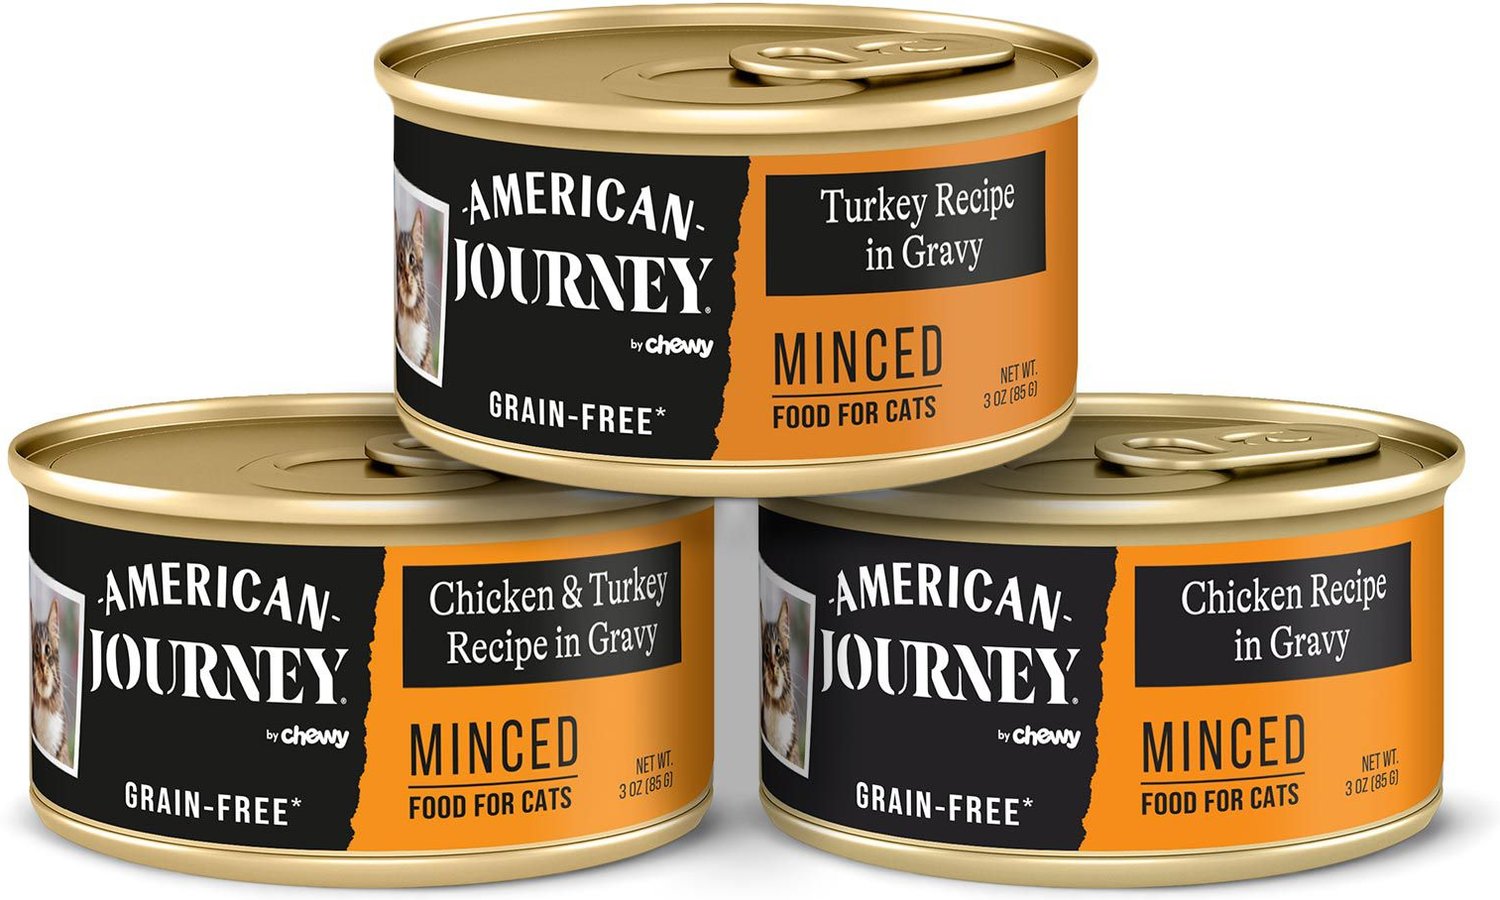 American Journey Minced Poultry in Gravy Variety Pack ...